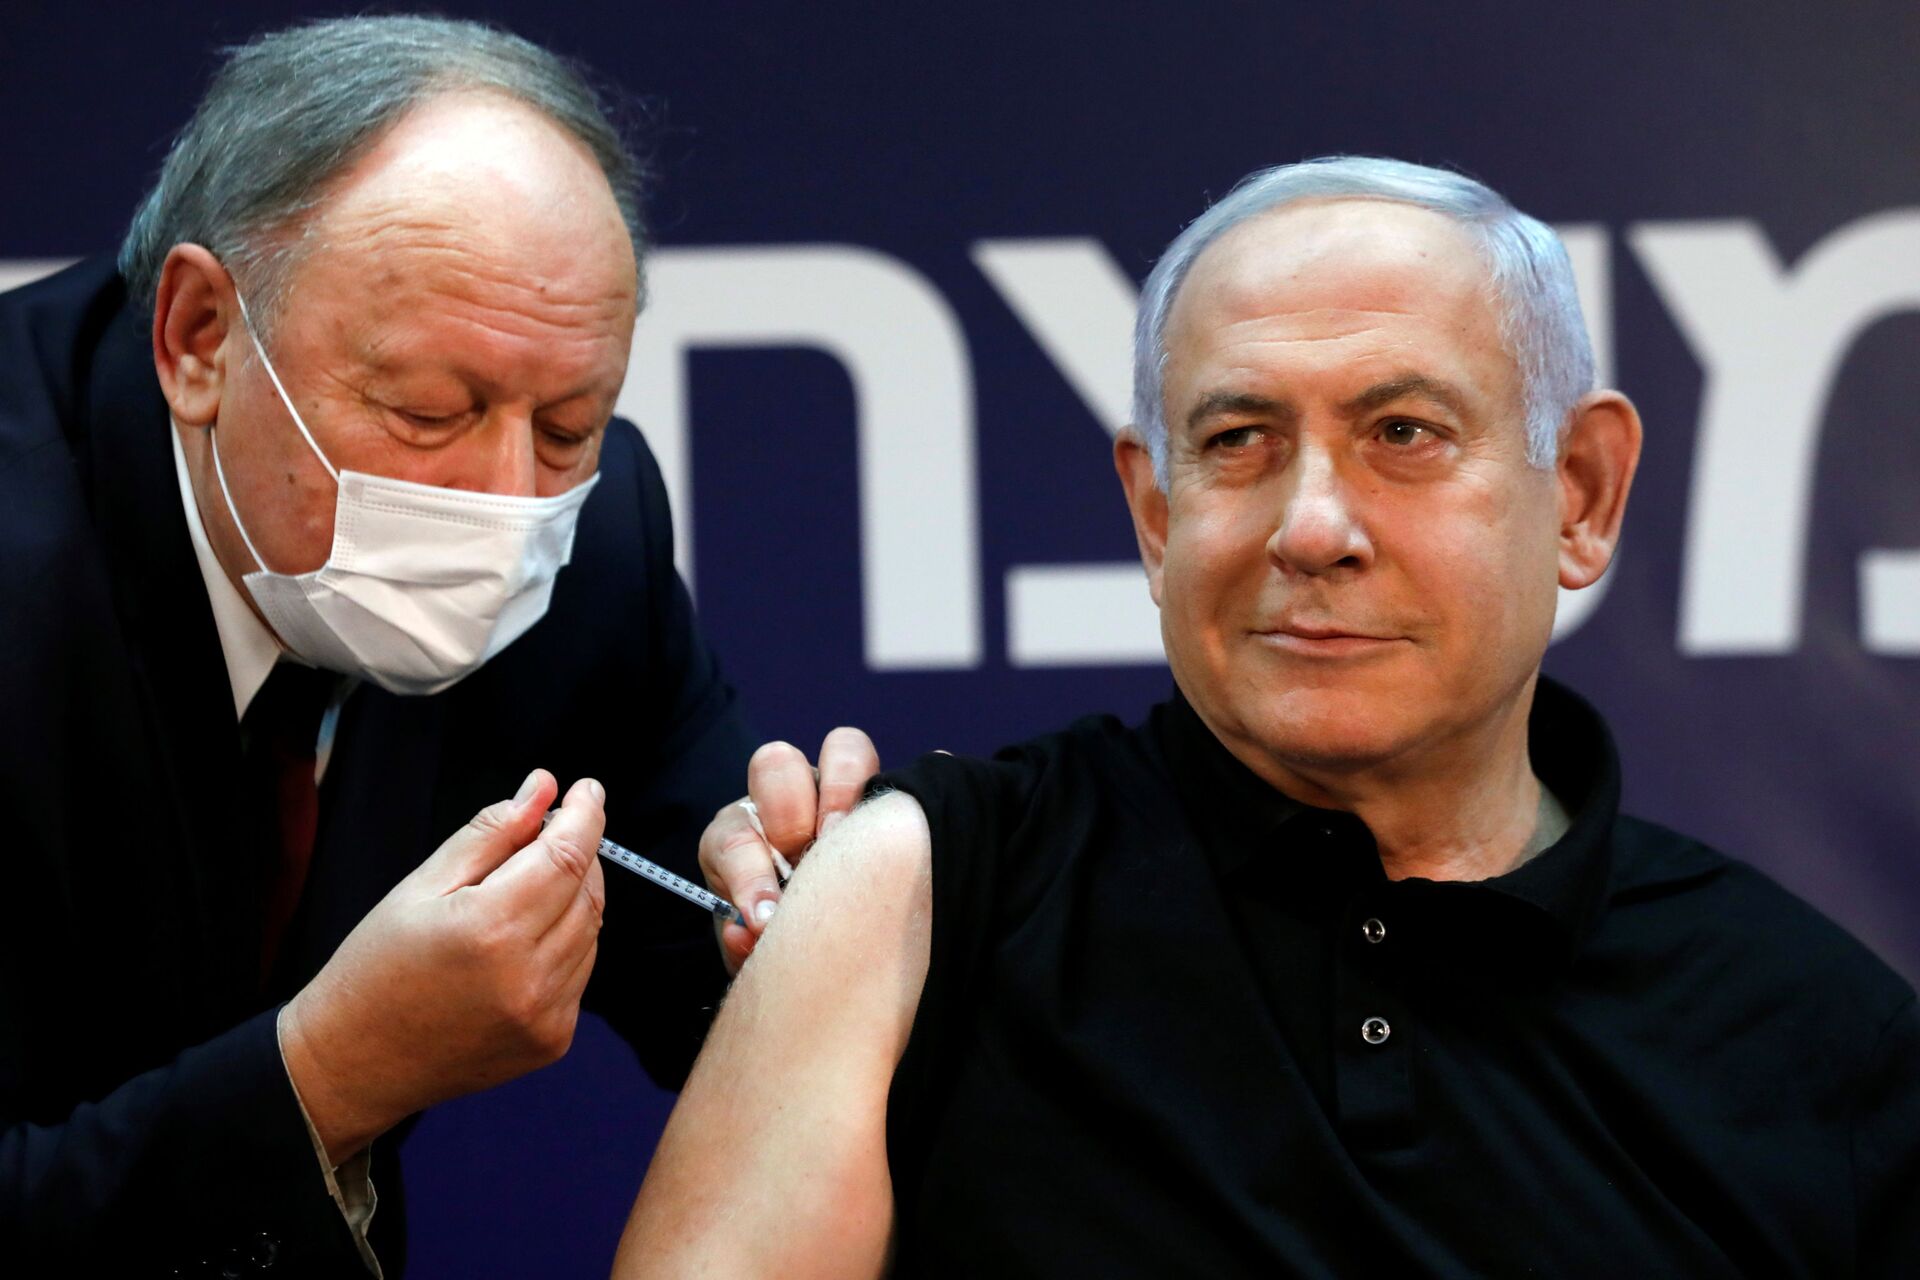 'Beginning of the End’: Netanyahu Likens First Arrival of COVID Vaccines in Israel to 'Pearl Harbor' - Sputnik International, 1920, 07.06.2021